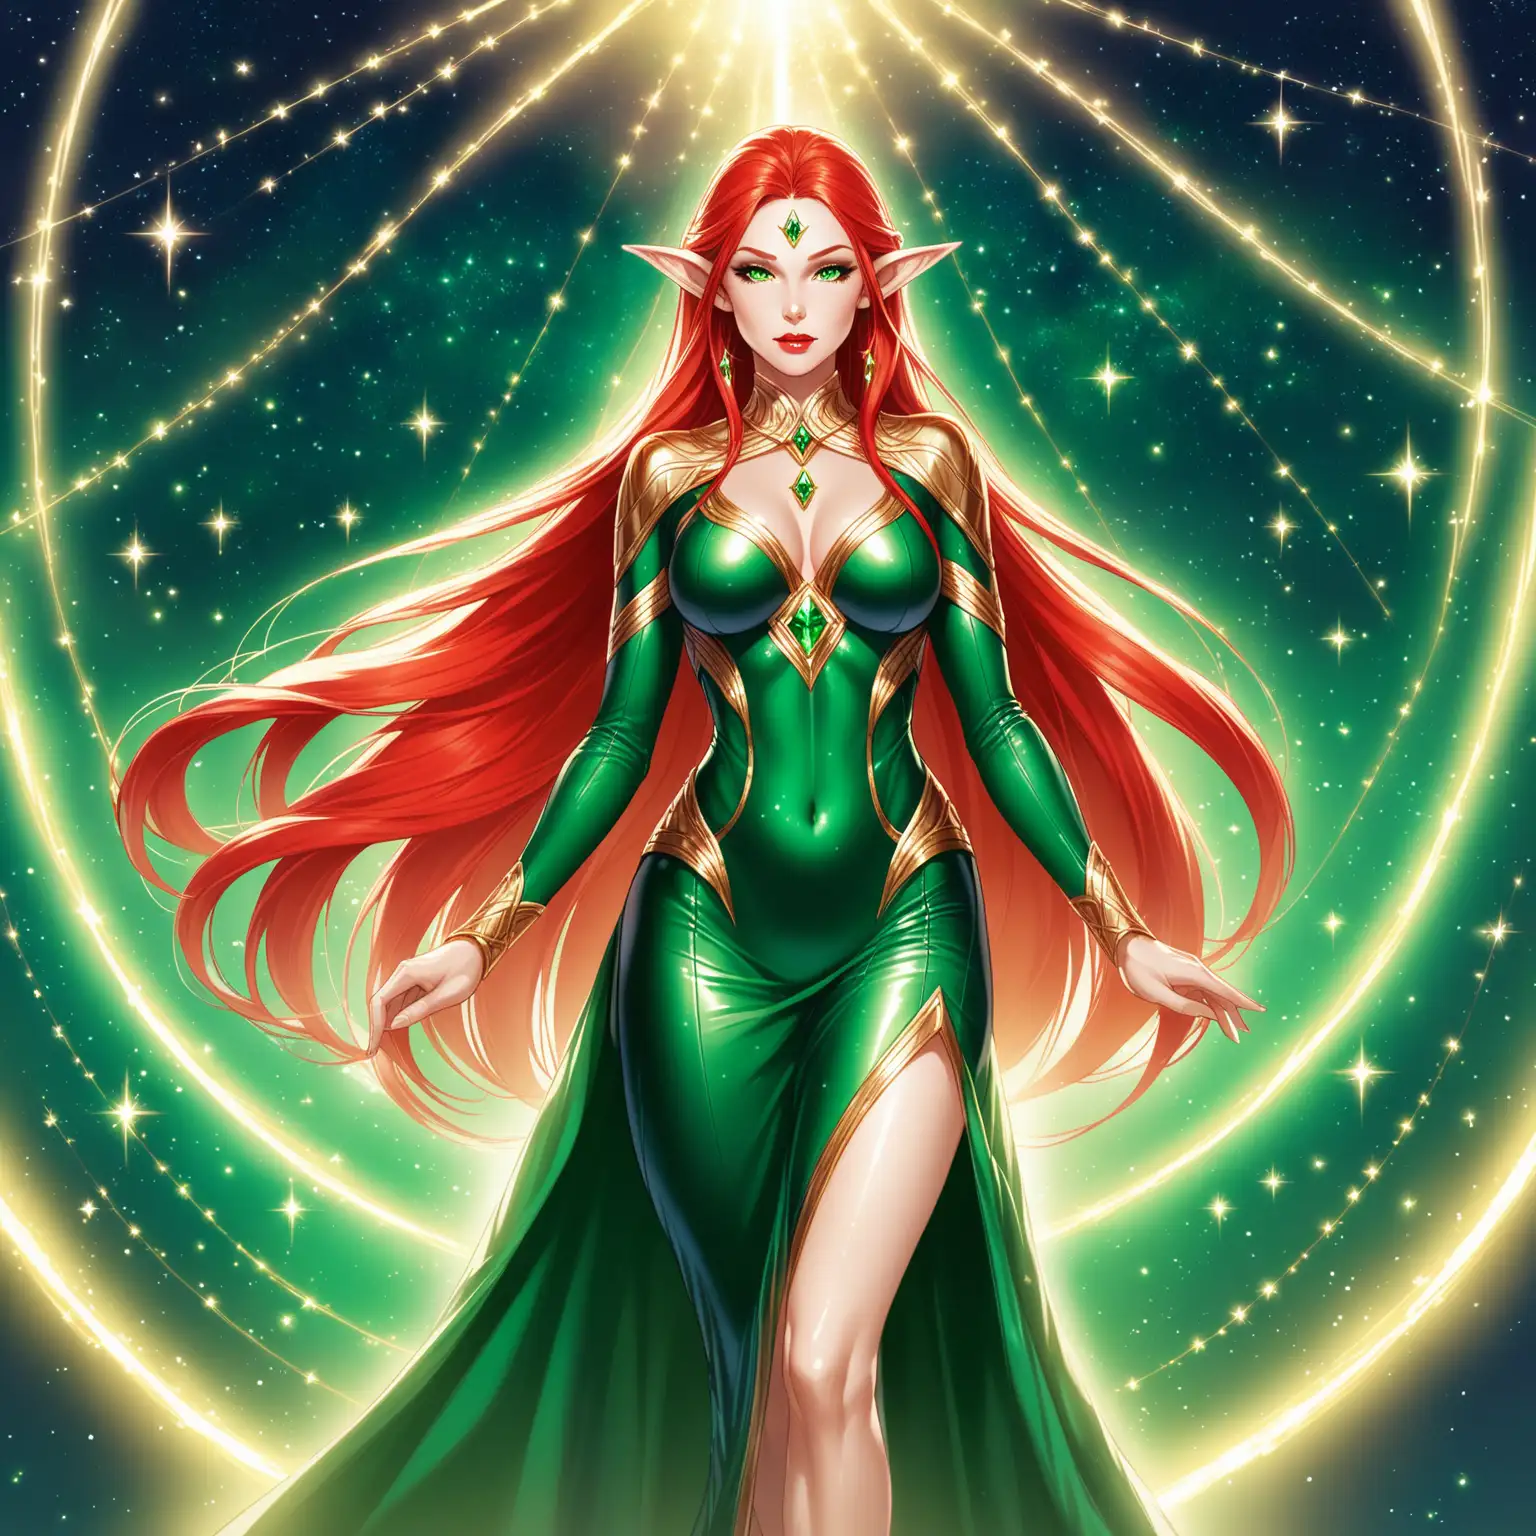 1 elf woman. She is the goddess of the elves and she is a warrior. She is extremely beautiful and mature. She is 60 years old. She has very long straight red hair. She is wearing makeup and shiny red lipstick. She is elegant and regal. She has medium tits and is physically fit. She is wearing a hunter green long latex dress and high heels. She is wearing gold Jewelry with emeralds. She has a serious expression and looks powerful. She does not look young. She is in the elven heaven with stars and magic in the background. She does not look young and looks mature.